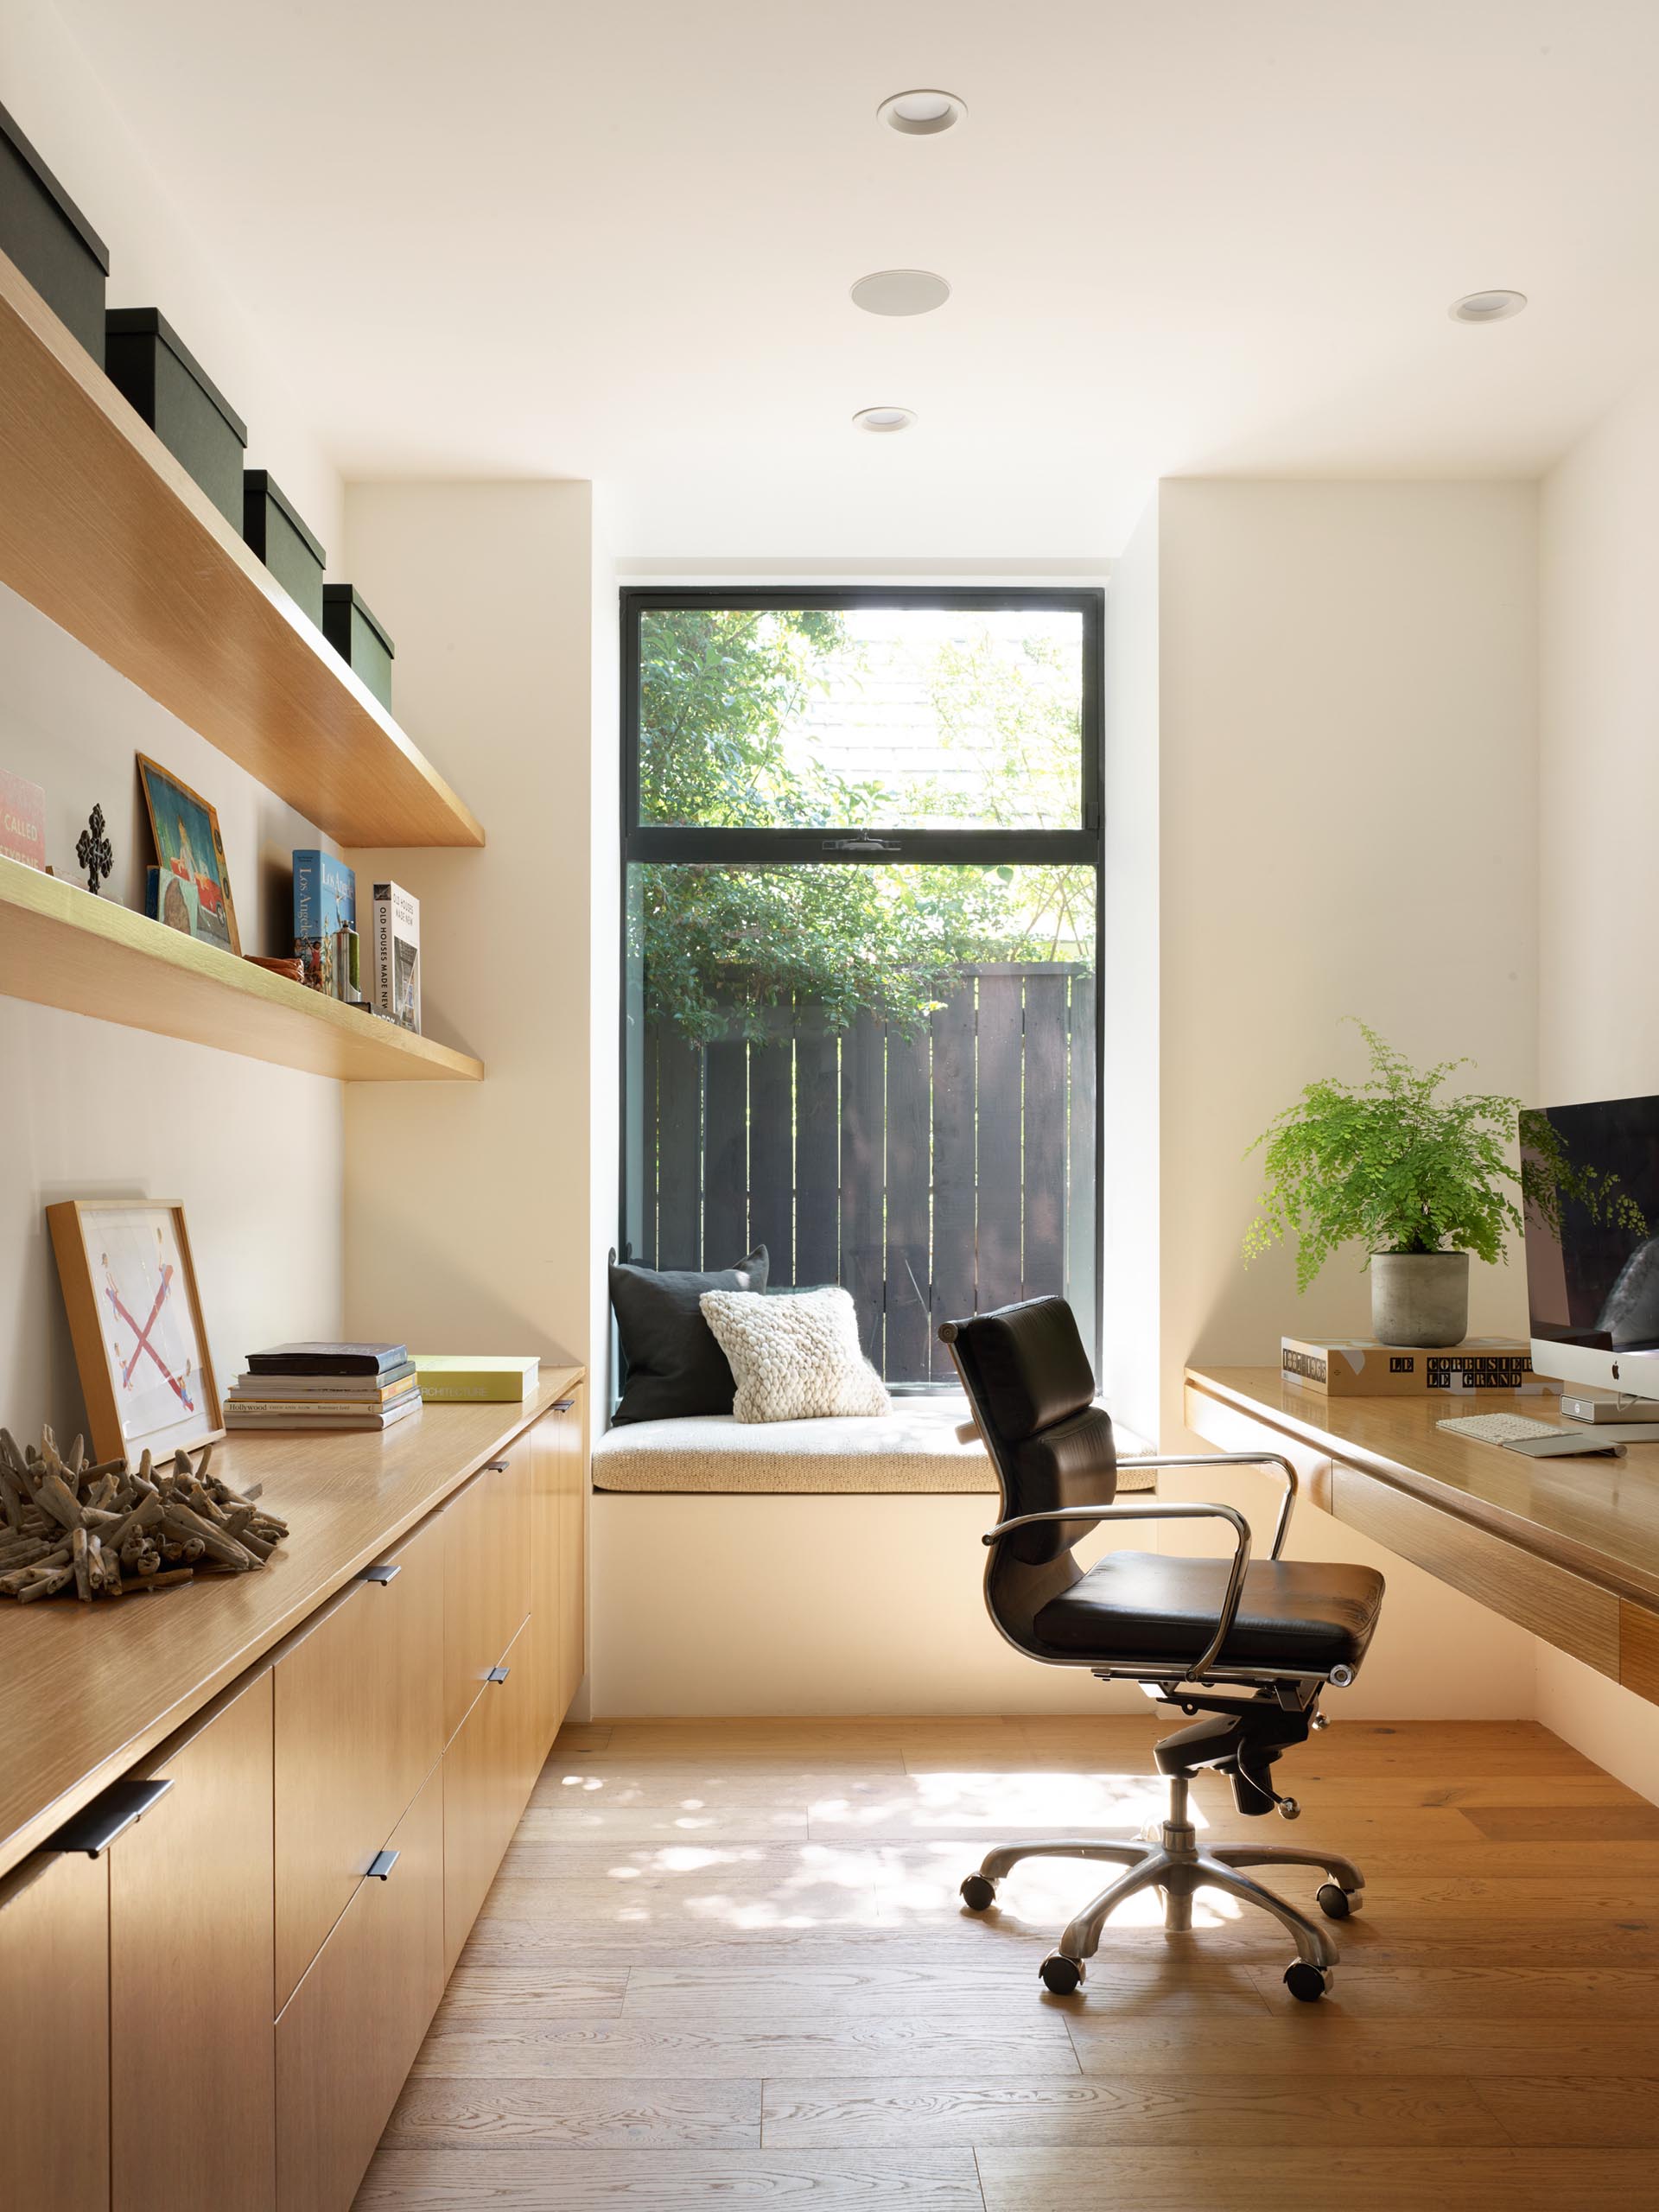 A home office furnished with a desk, a window seat, shelving, and cabinetry.